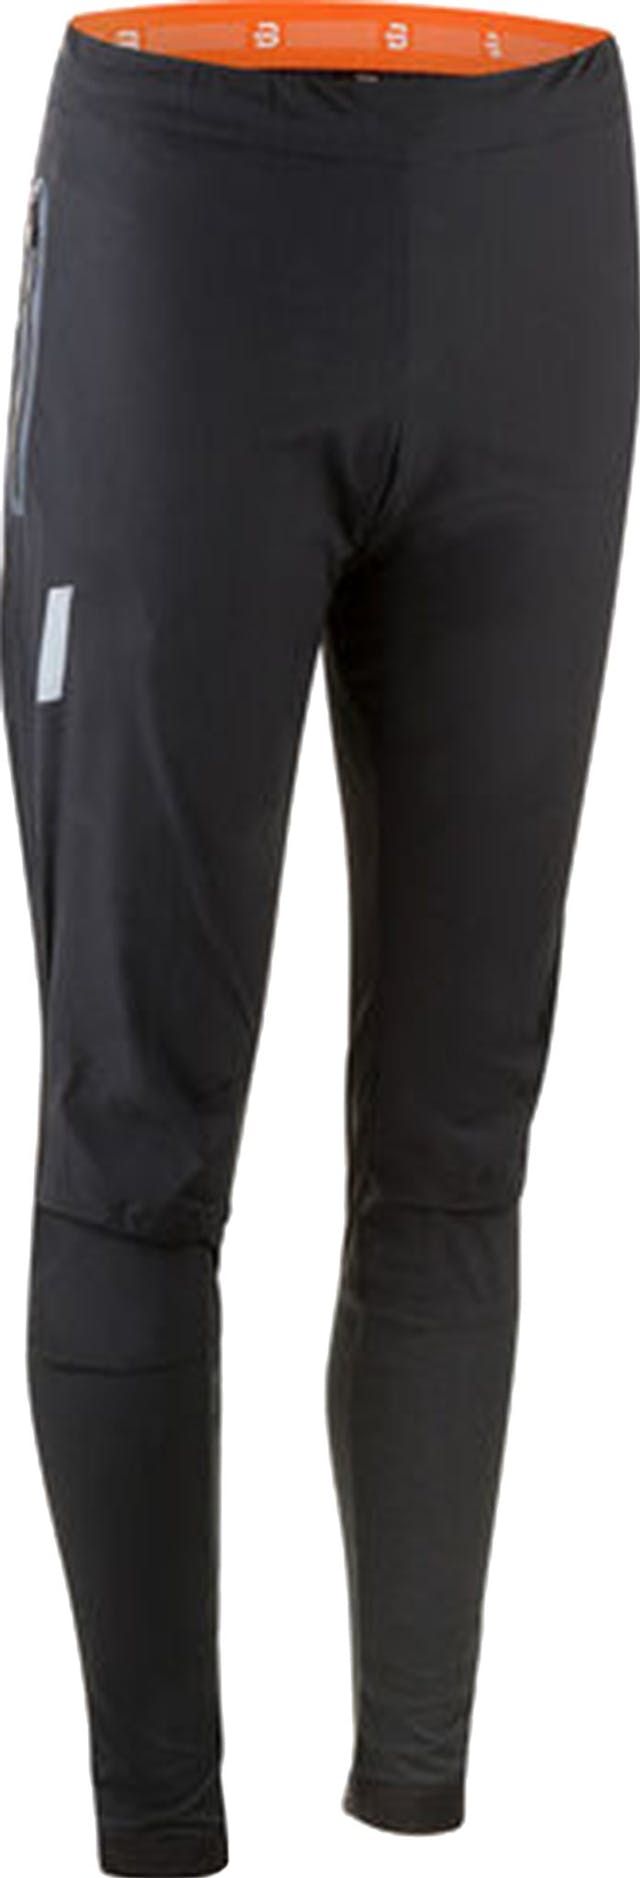 Product image for Run Pants - Women's